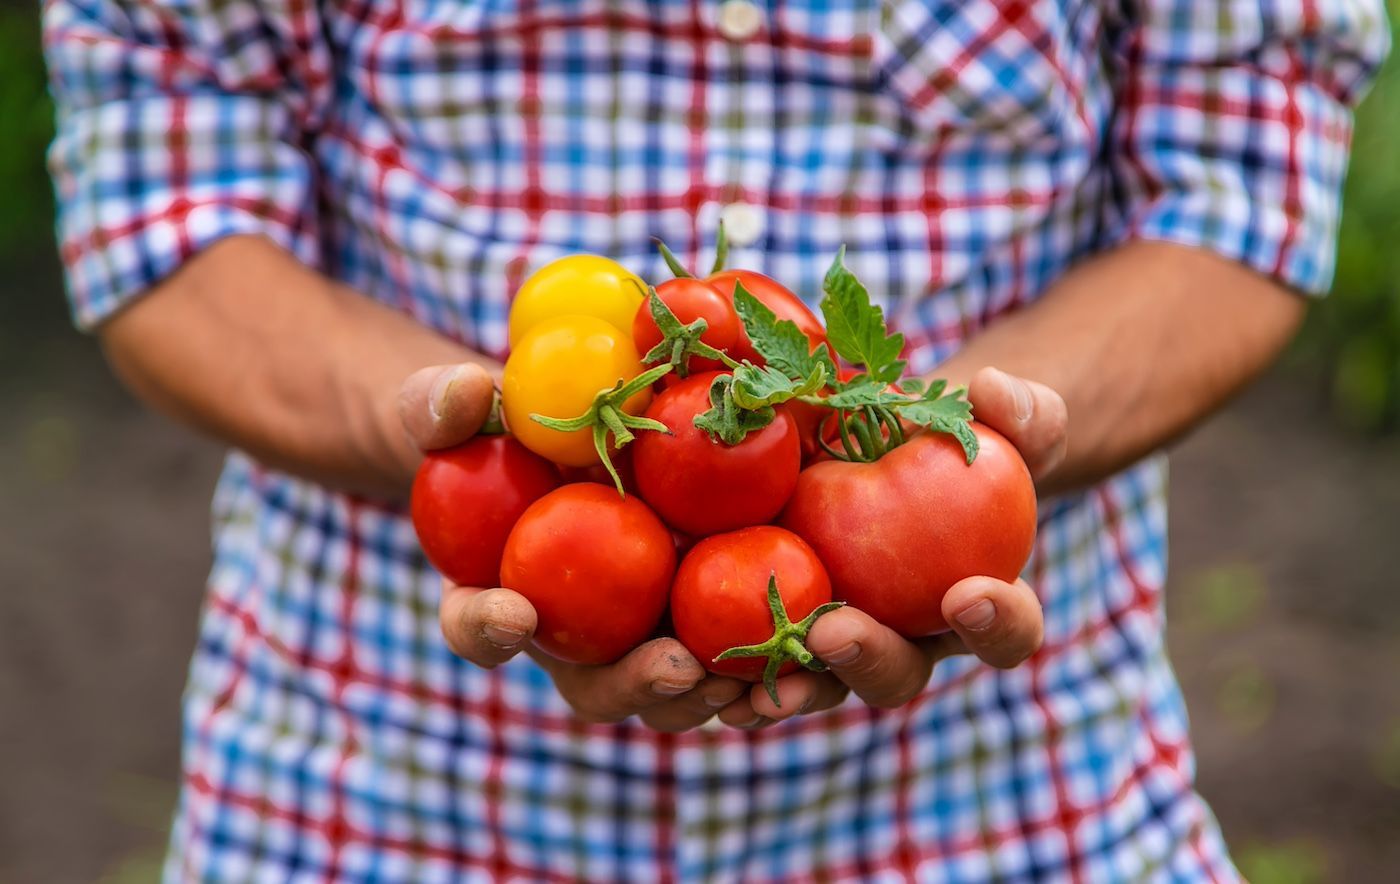 Tomatoes Come in Types Like Cherry and Beefsteak, With a Sweet and Acidic Taste.